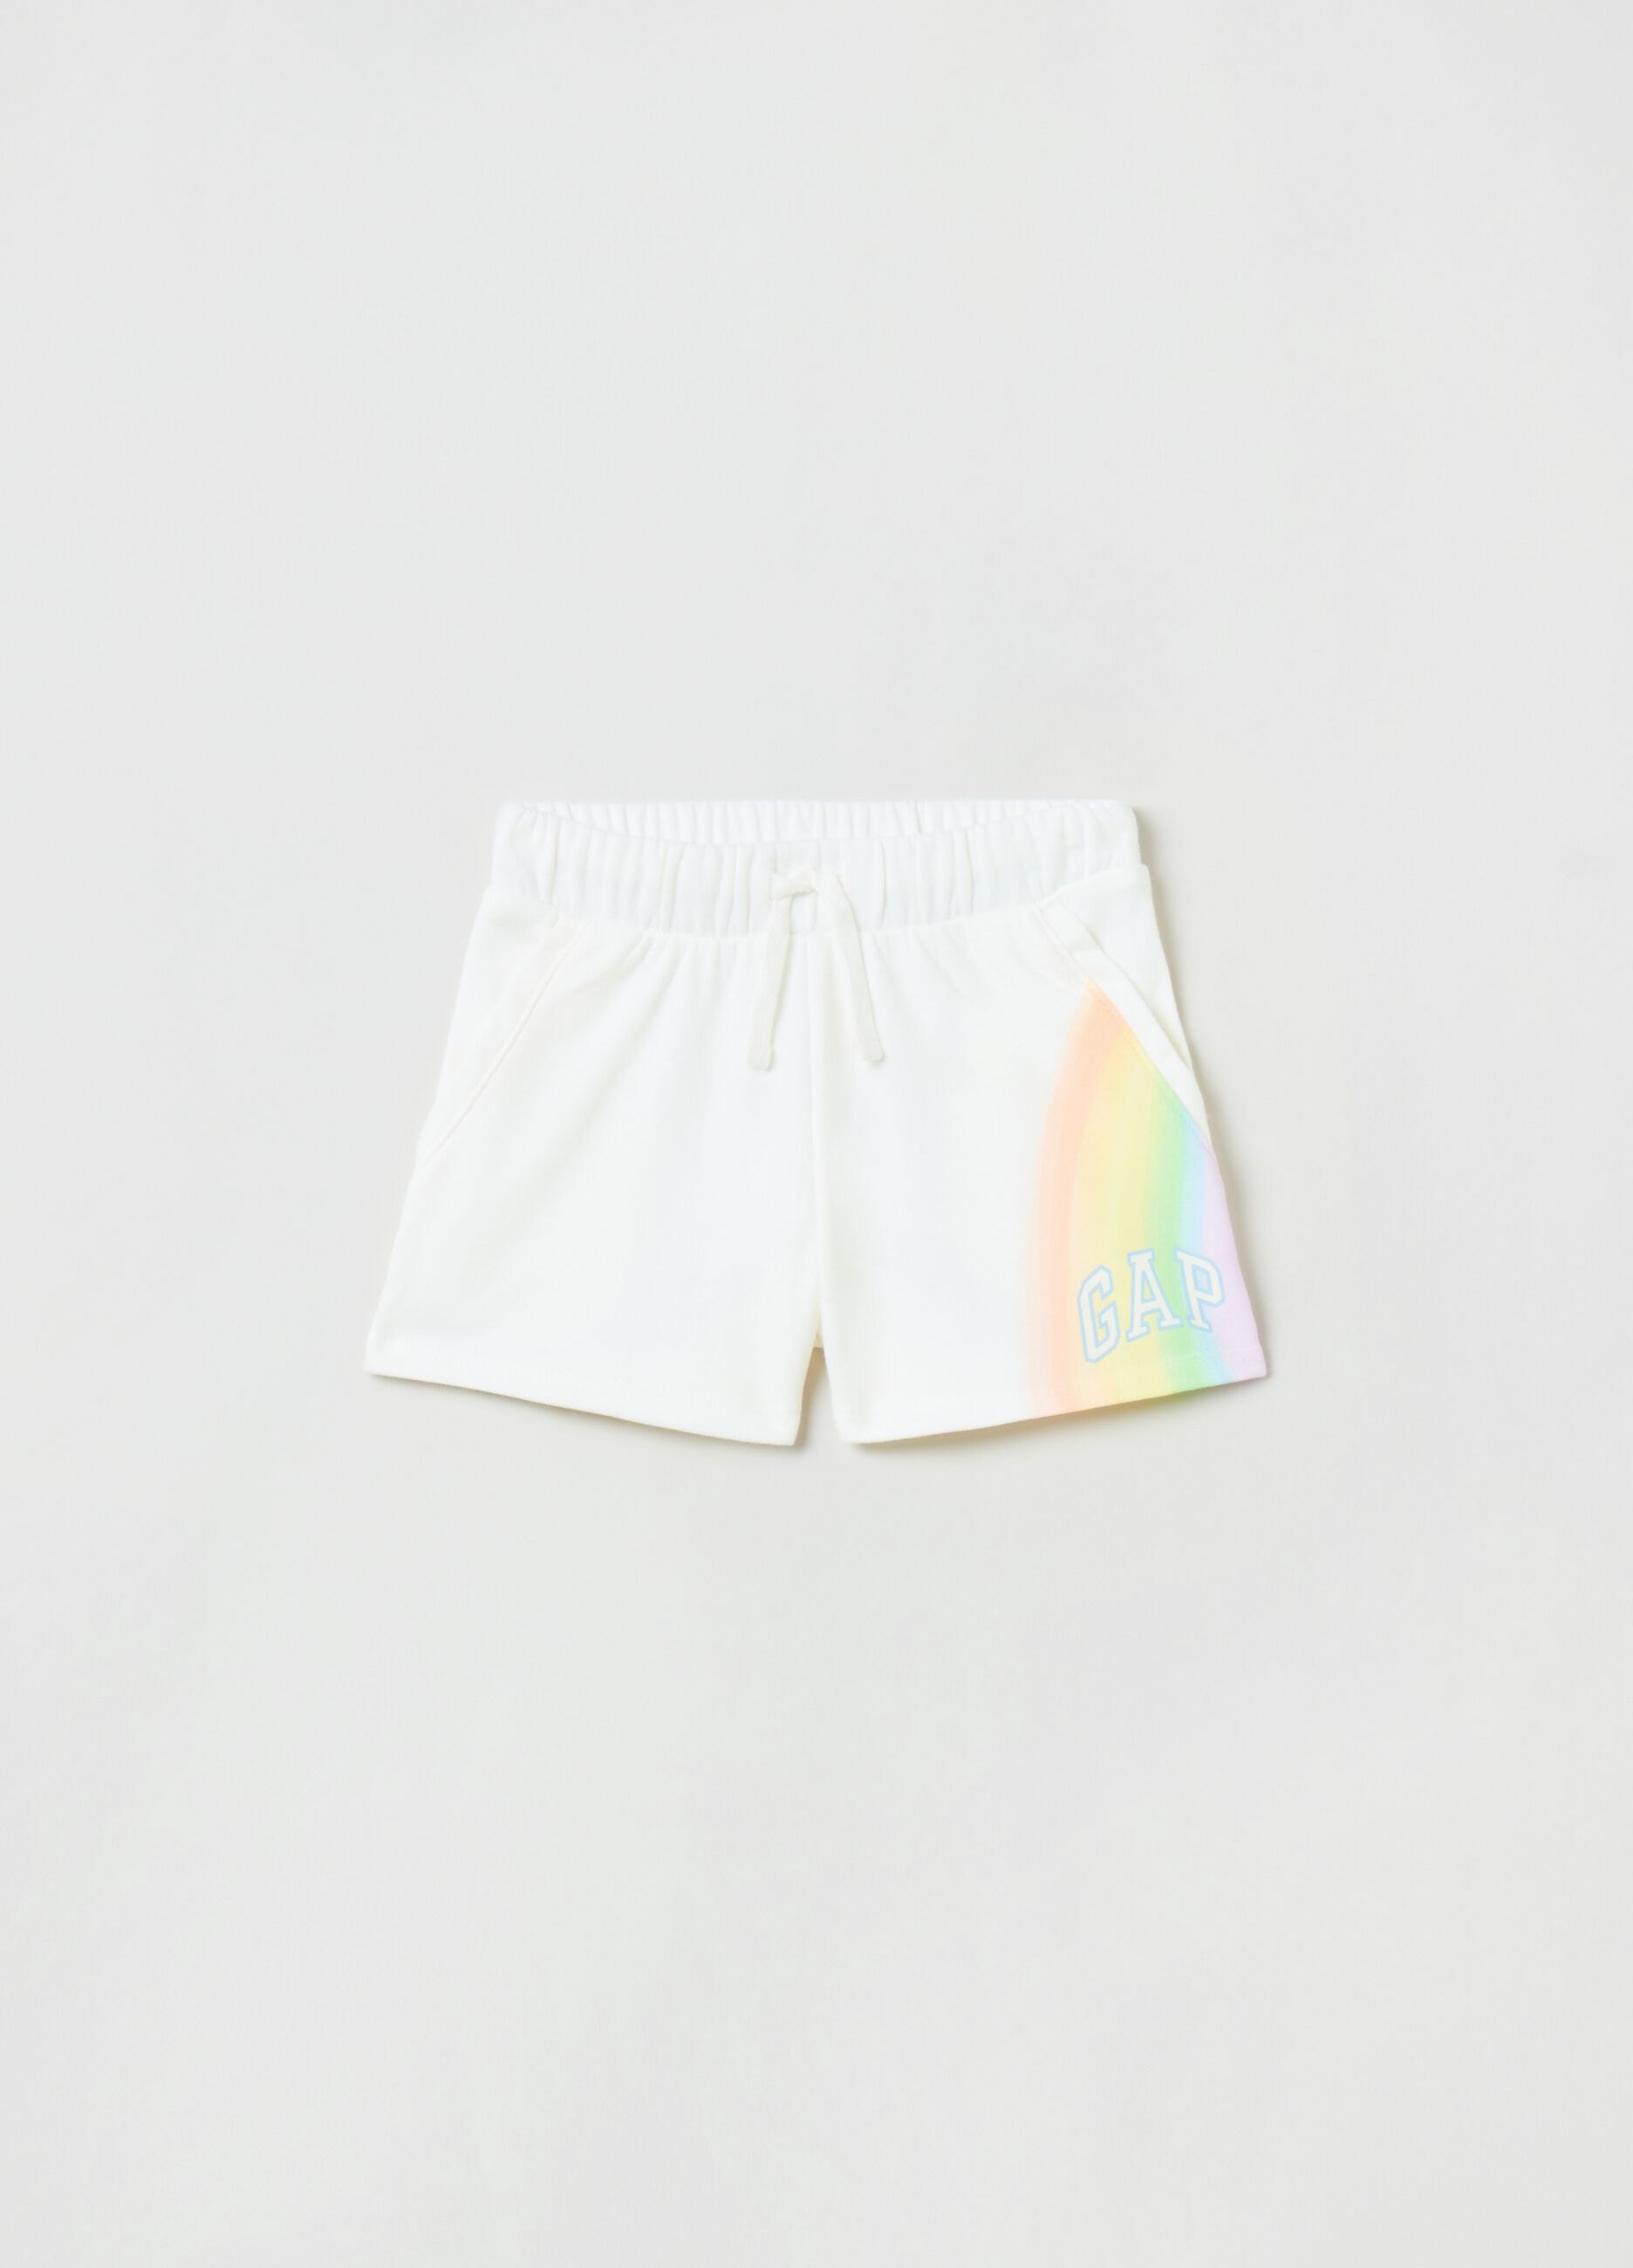 Shorts with logo and rainbow print